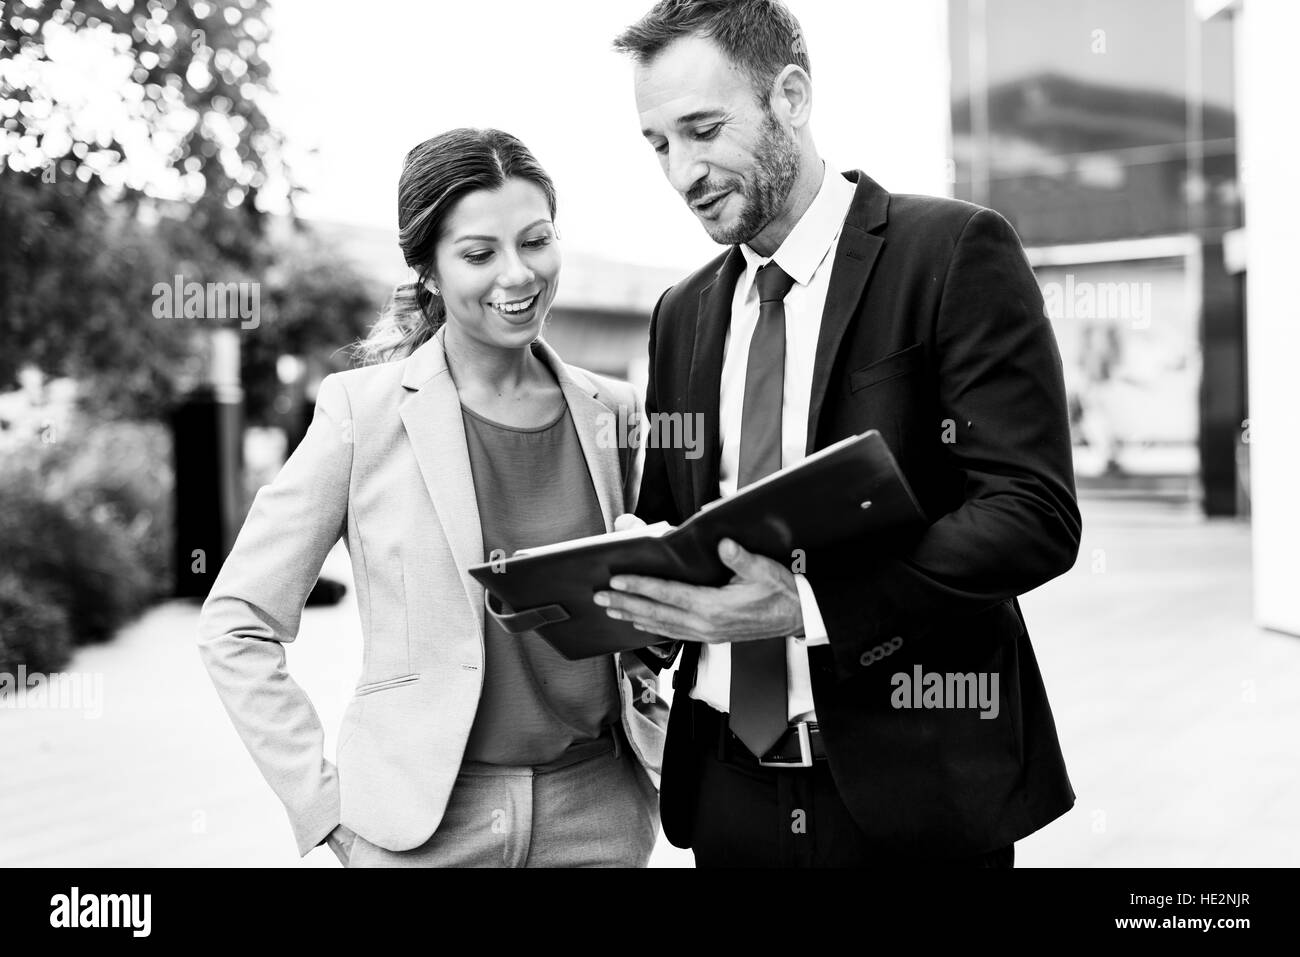 Business People Discussion Communication Togetherness Concept Stock Photo